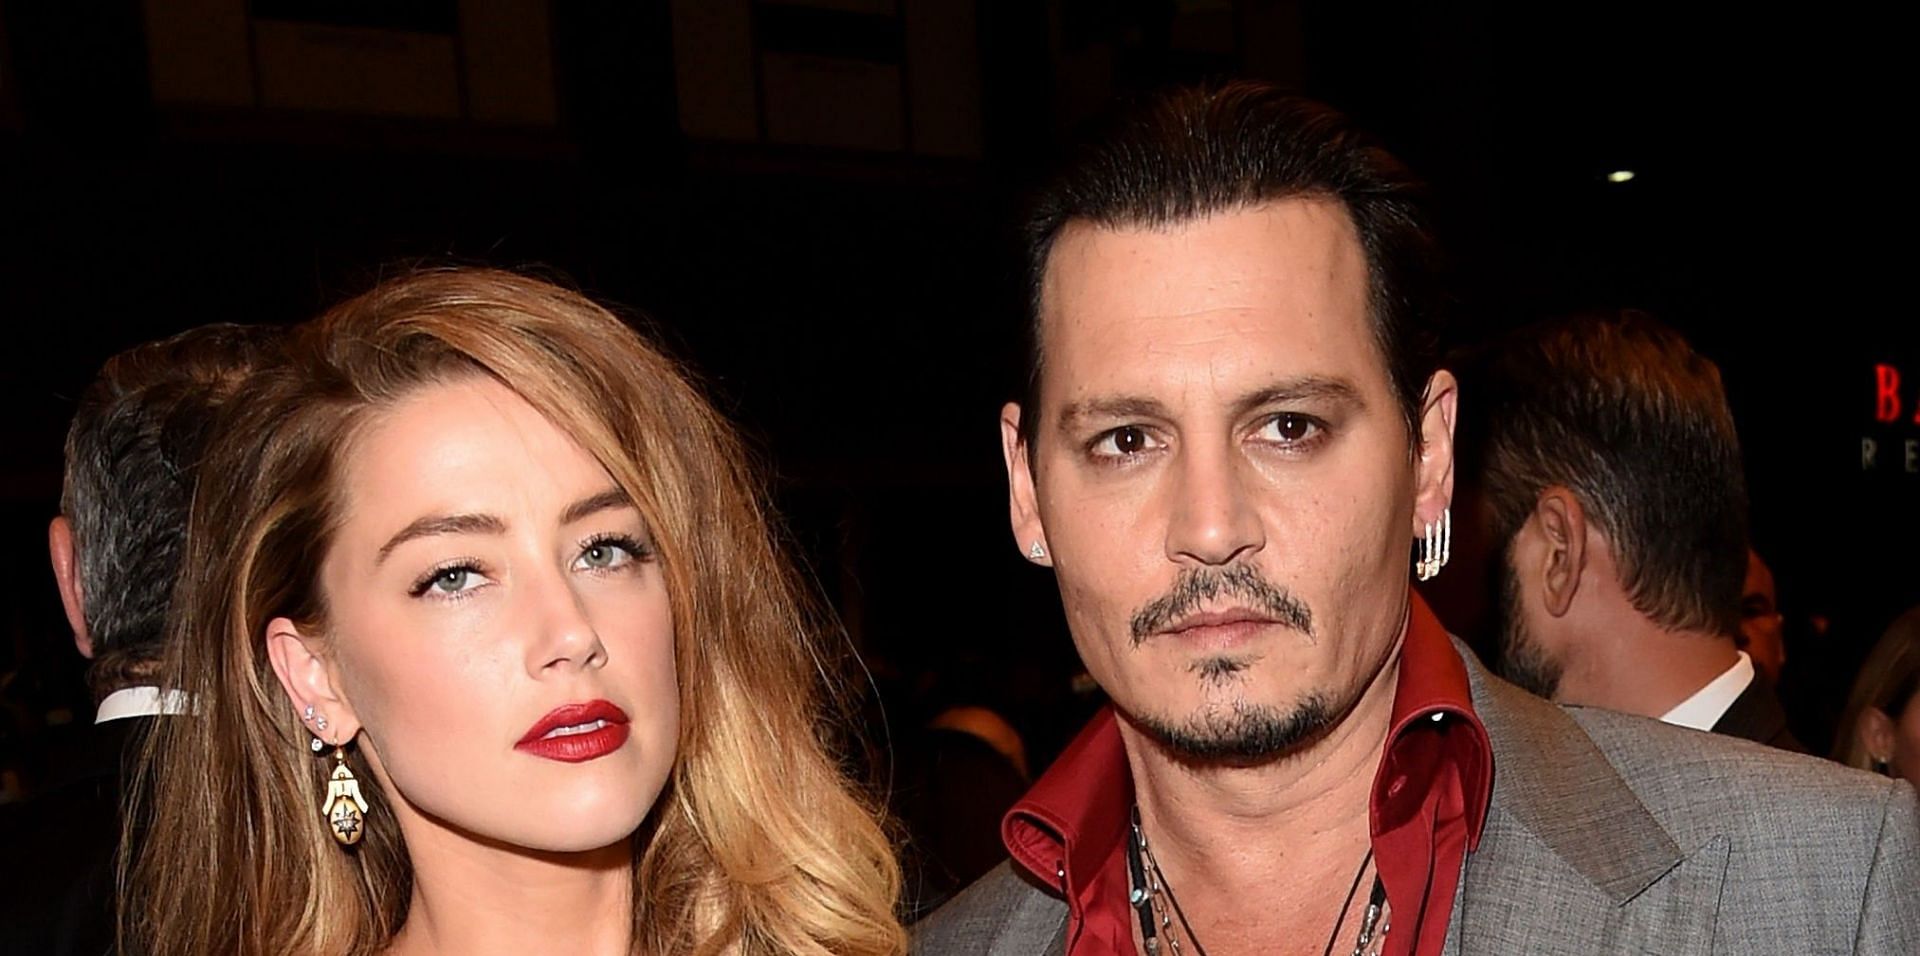 Dr Hughes said Amber Heard suffered from PTSD due to alleged IPV caused by Johnny Depp (Image via Getty Images)